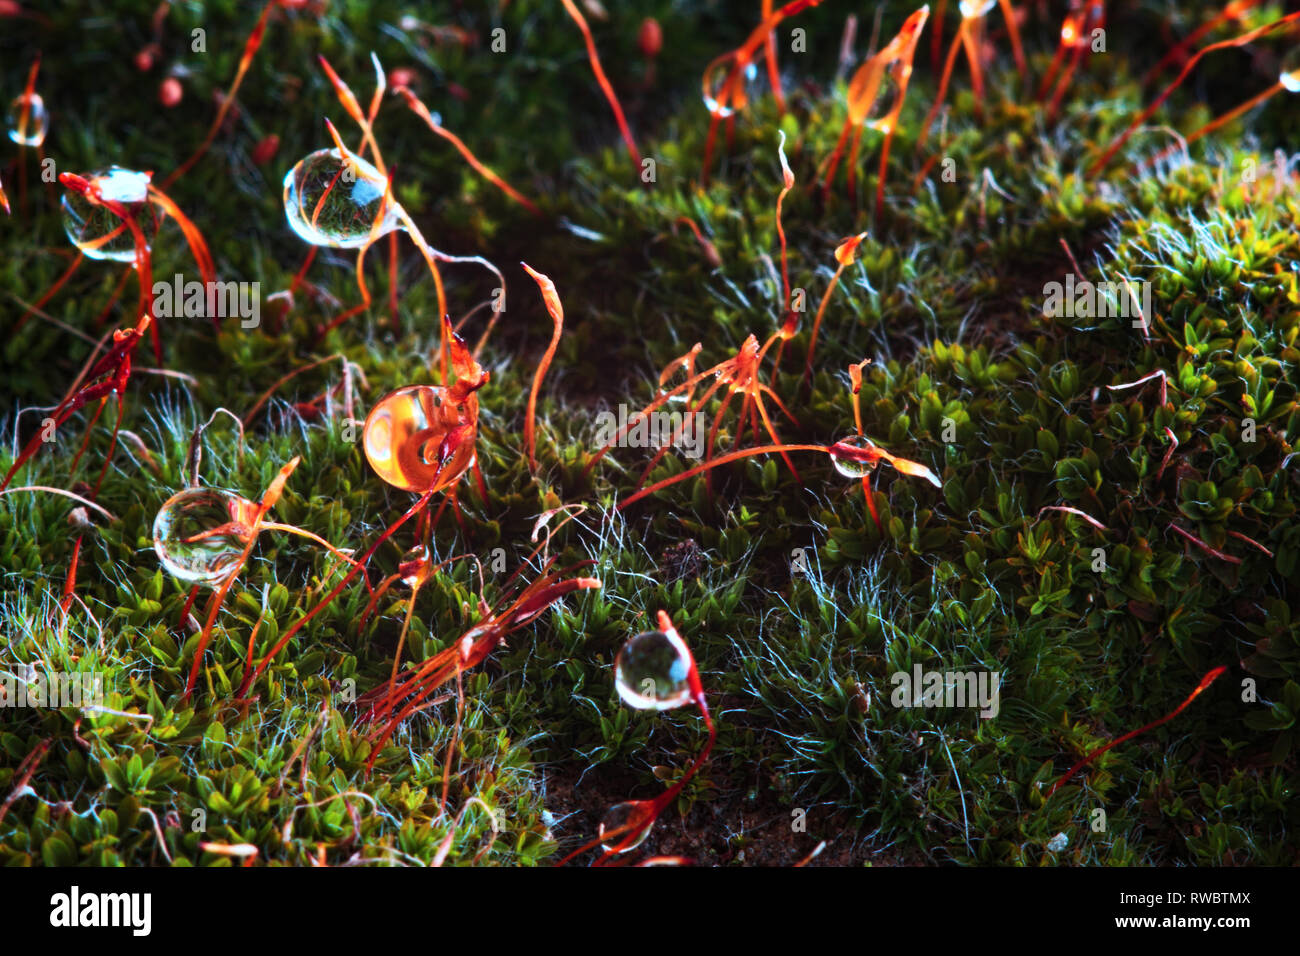 A raindrops on mosses vegetation. A moss with water drops. Water drops on the moss. Water drops macro Stock Photo